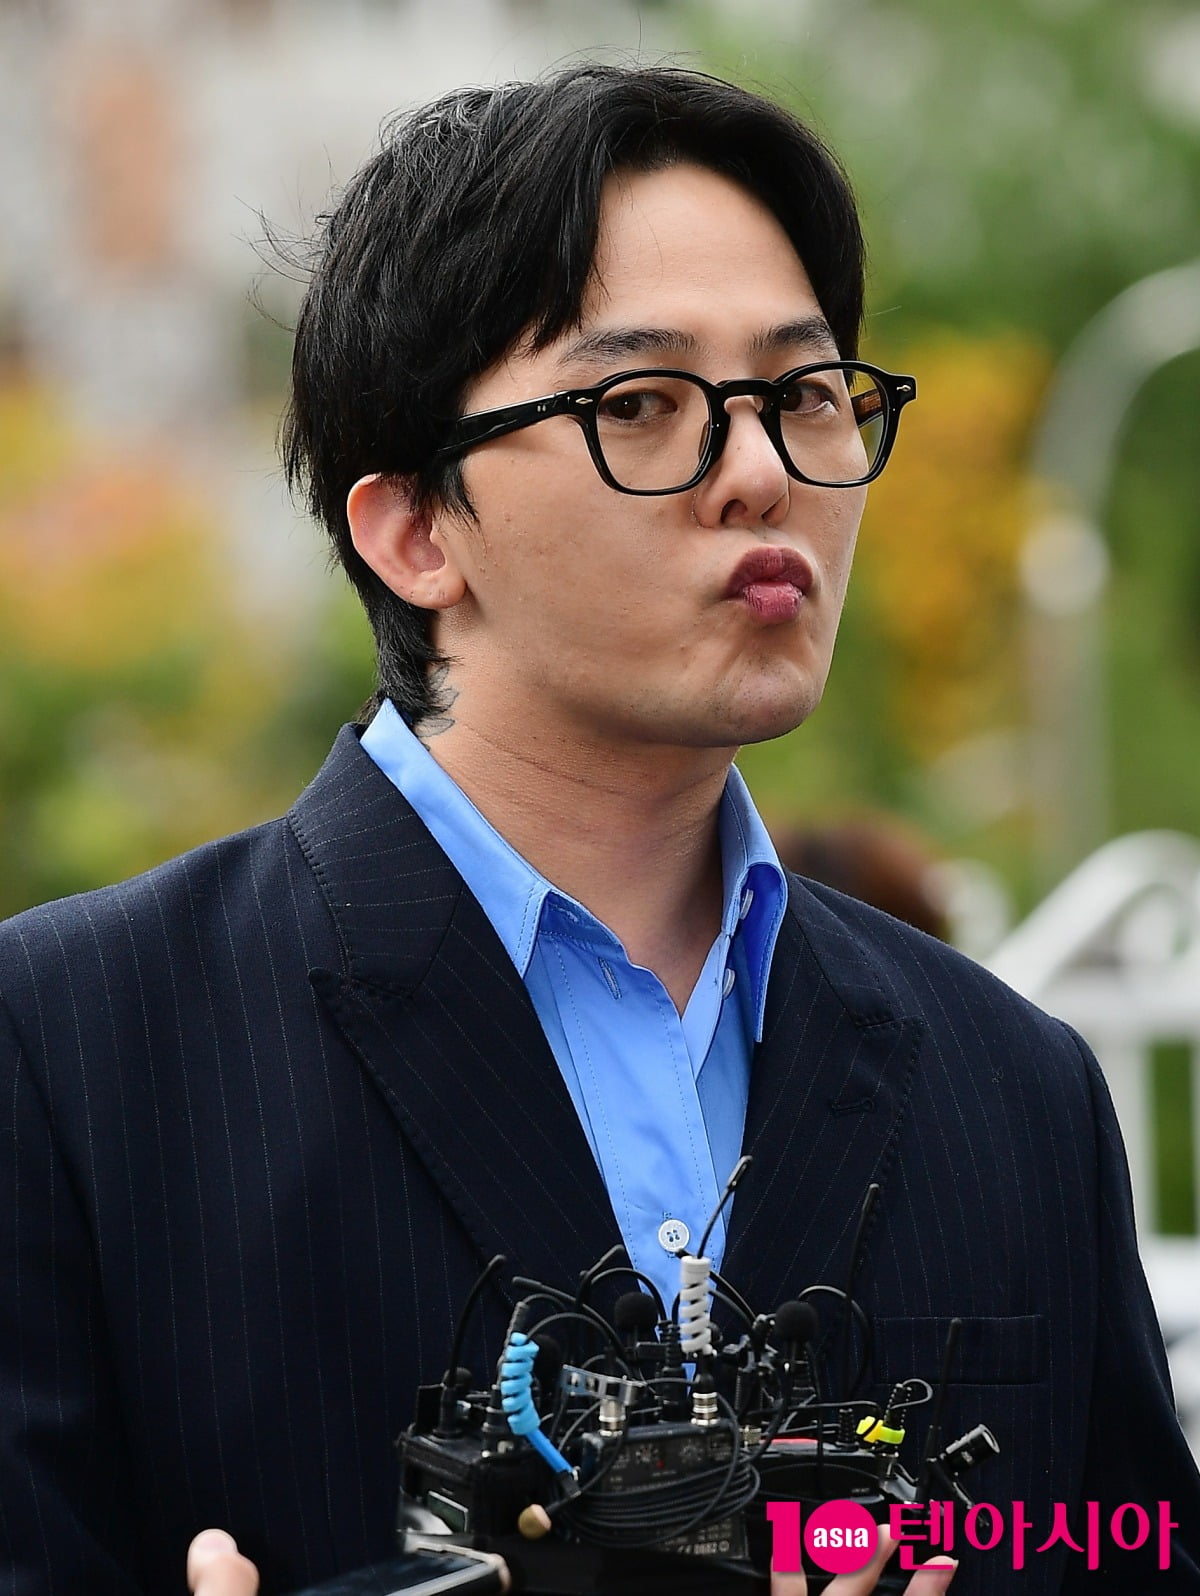 The drug investigation ends in nothing... Lee Sun-kyun without physical evidence, confident G-Dragon